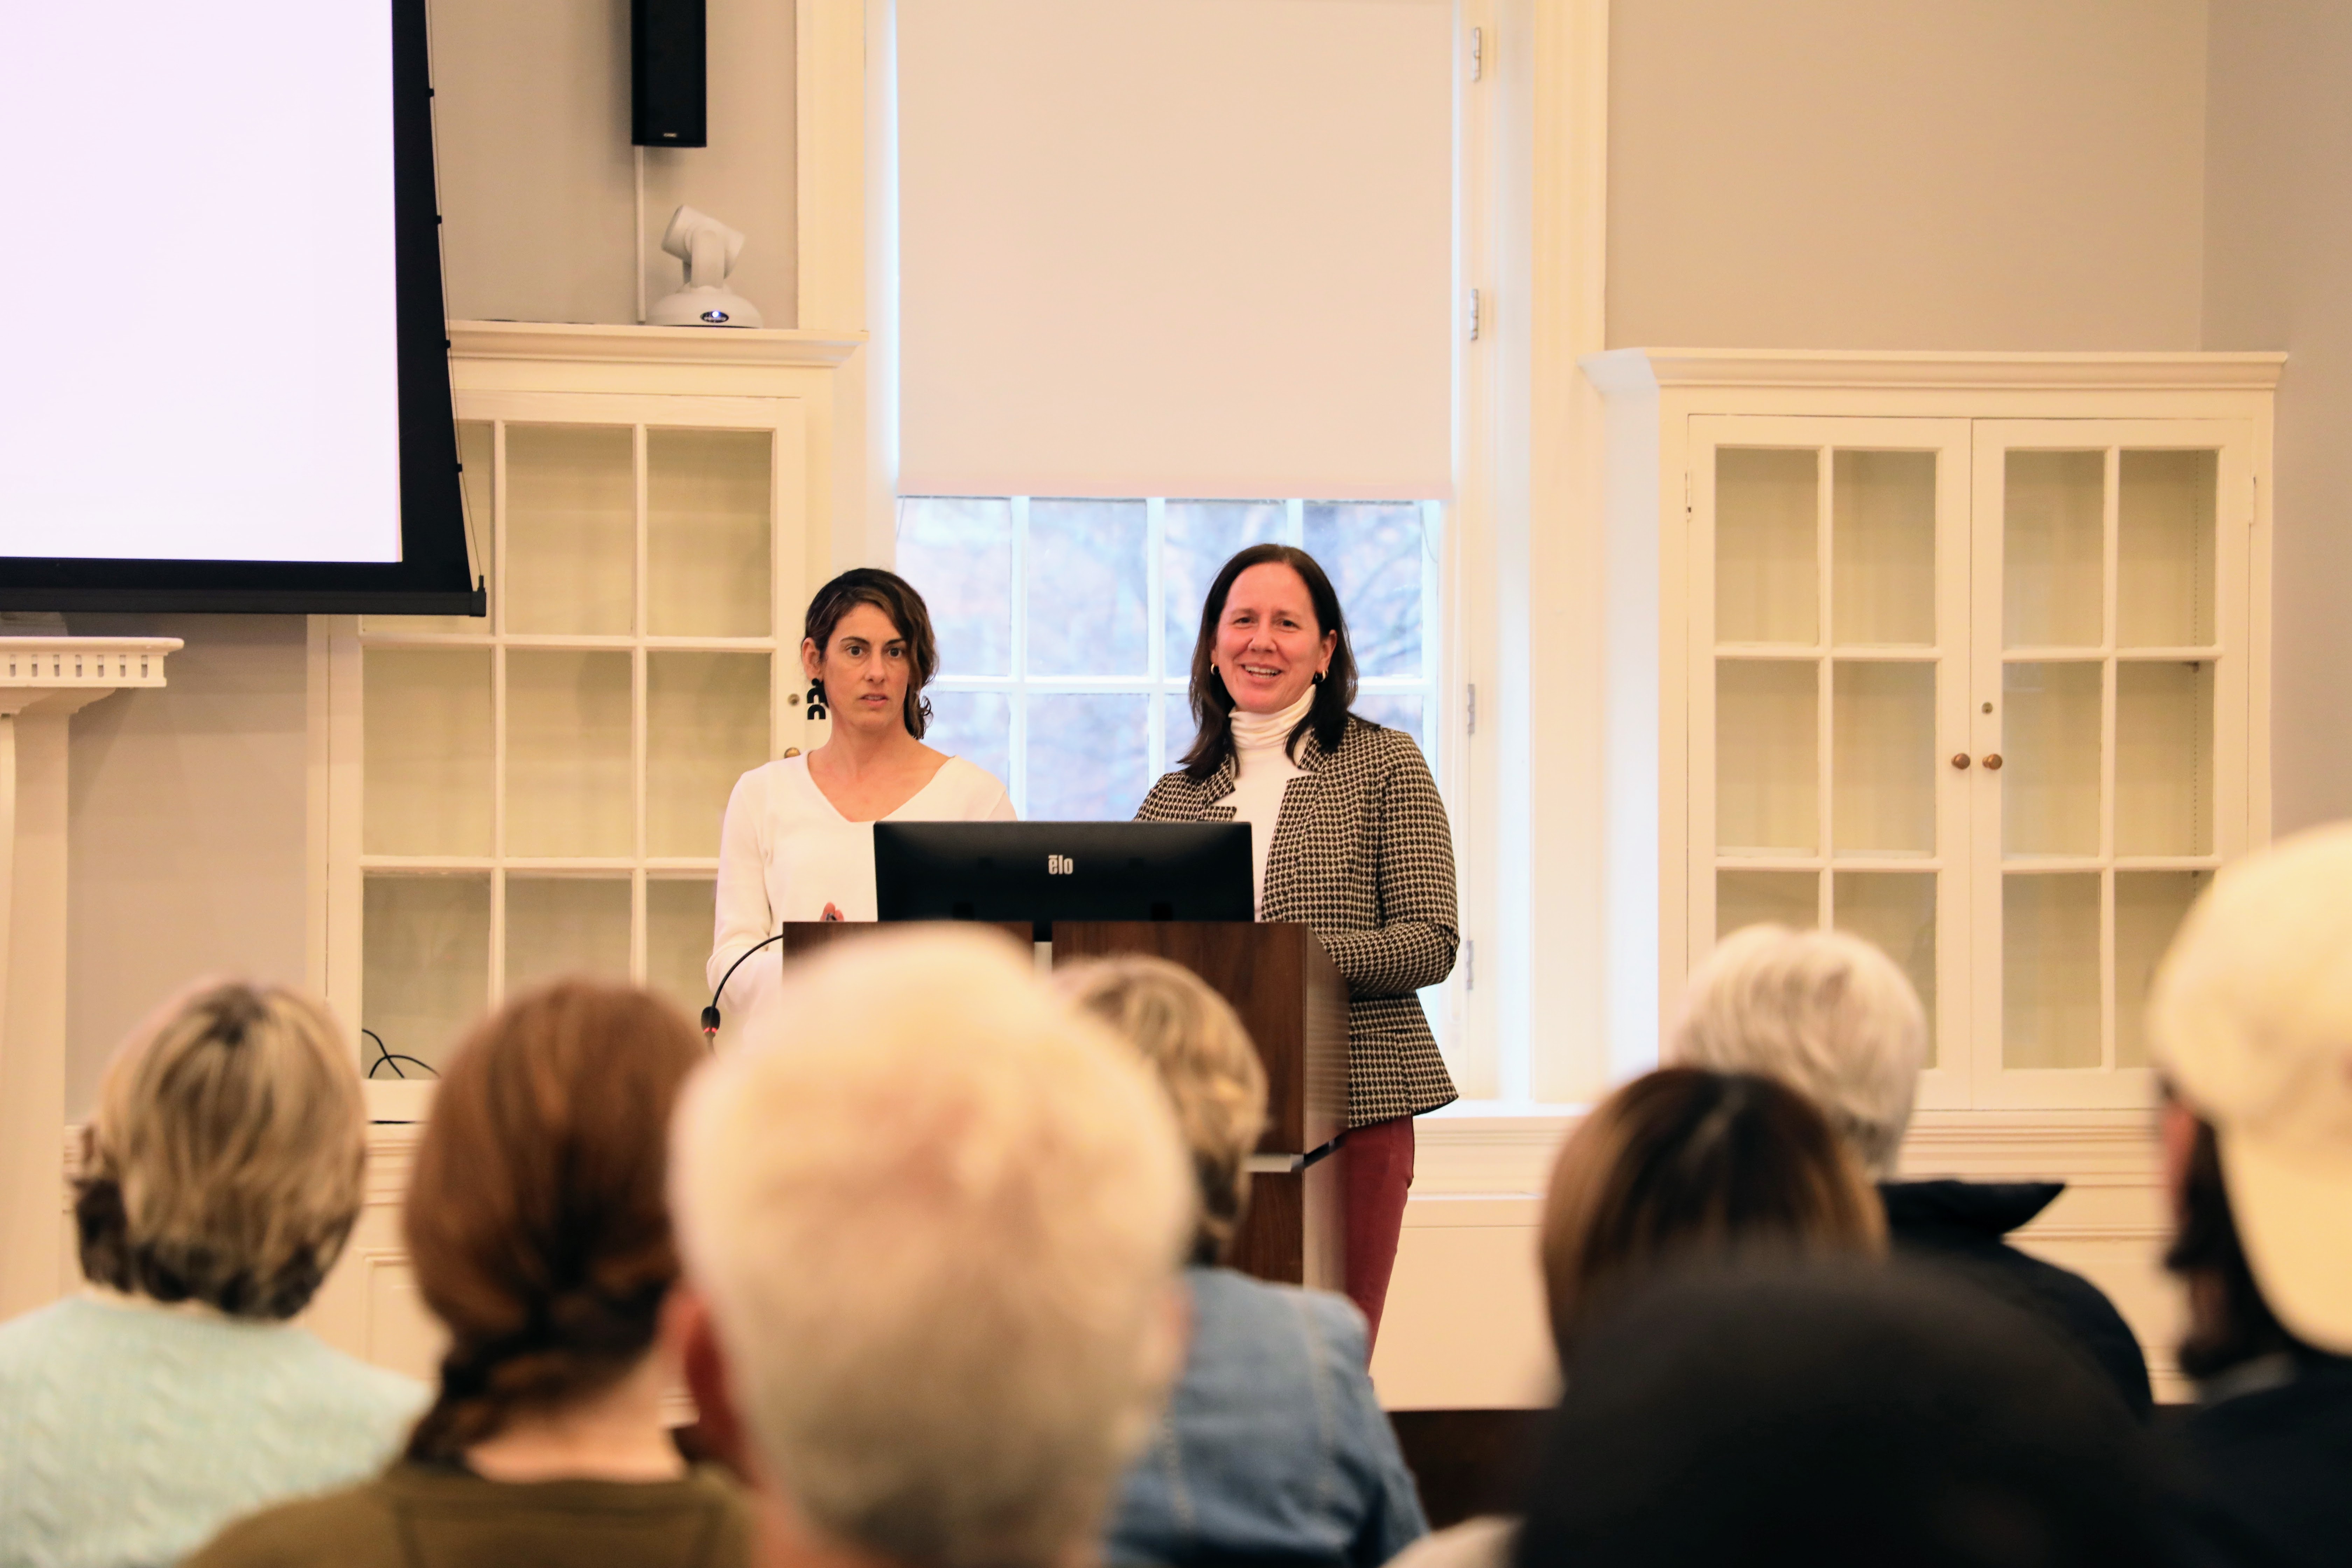 In a Sharp Journalism public talk Feb. 12, journalists Stephanie Hanes and Sara Miller Llana of the Christian Science Monitor shared insights gathered from a year’s worth of reporting in eight countries. (photo by Emmanuel Sampson)